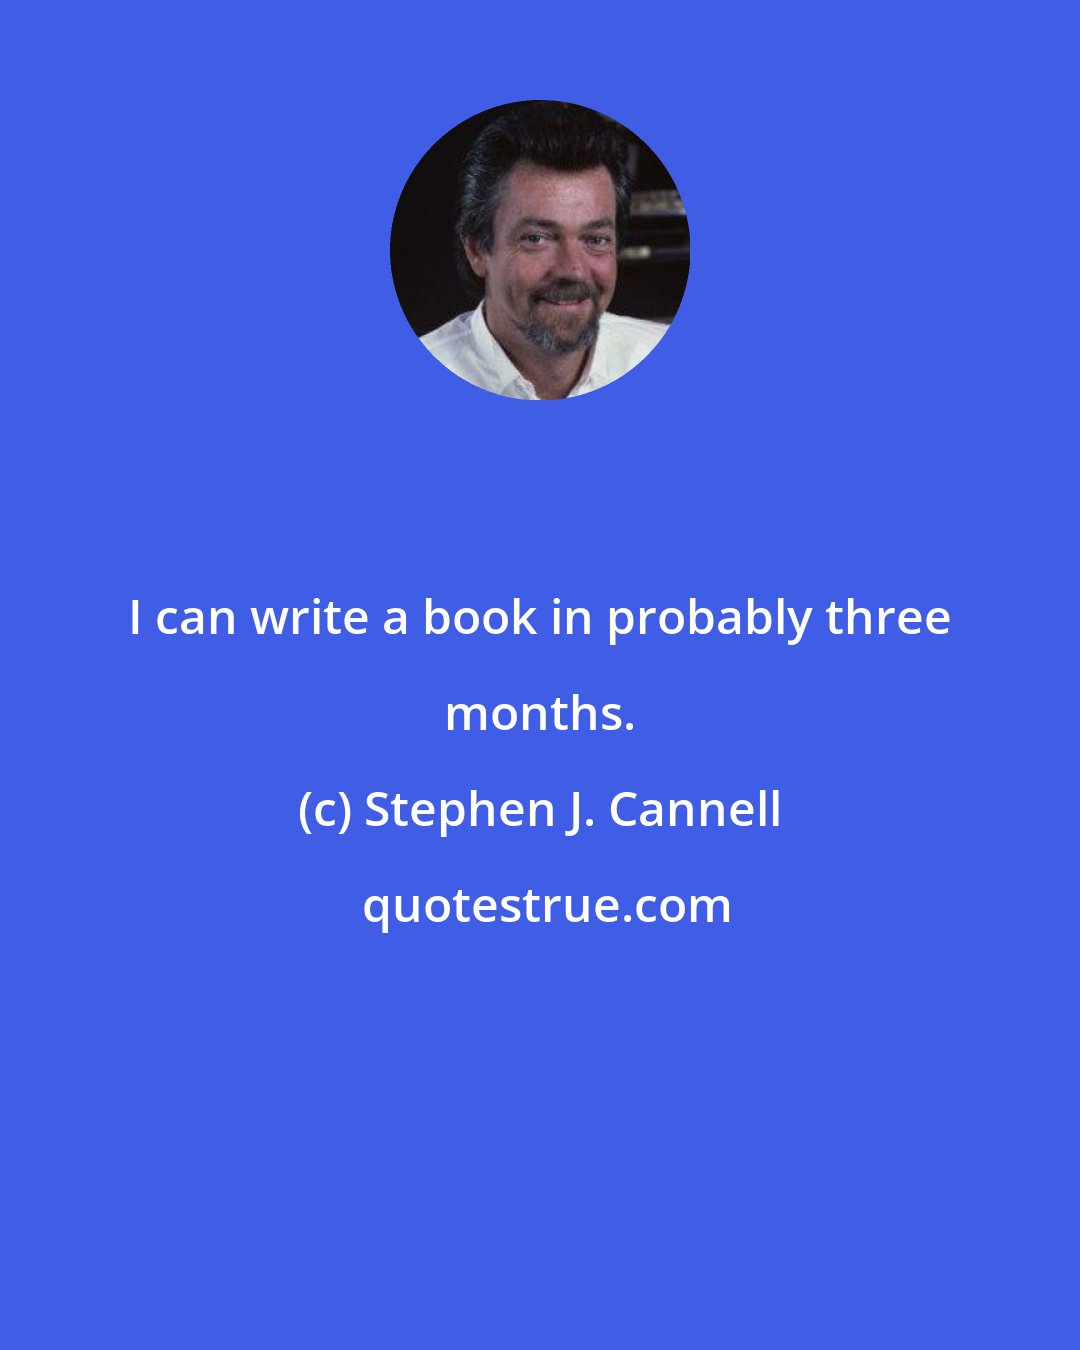 Stephen J. Cannell: I can write a book in probably three months.